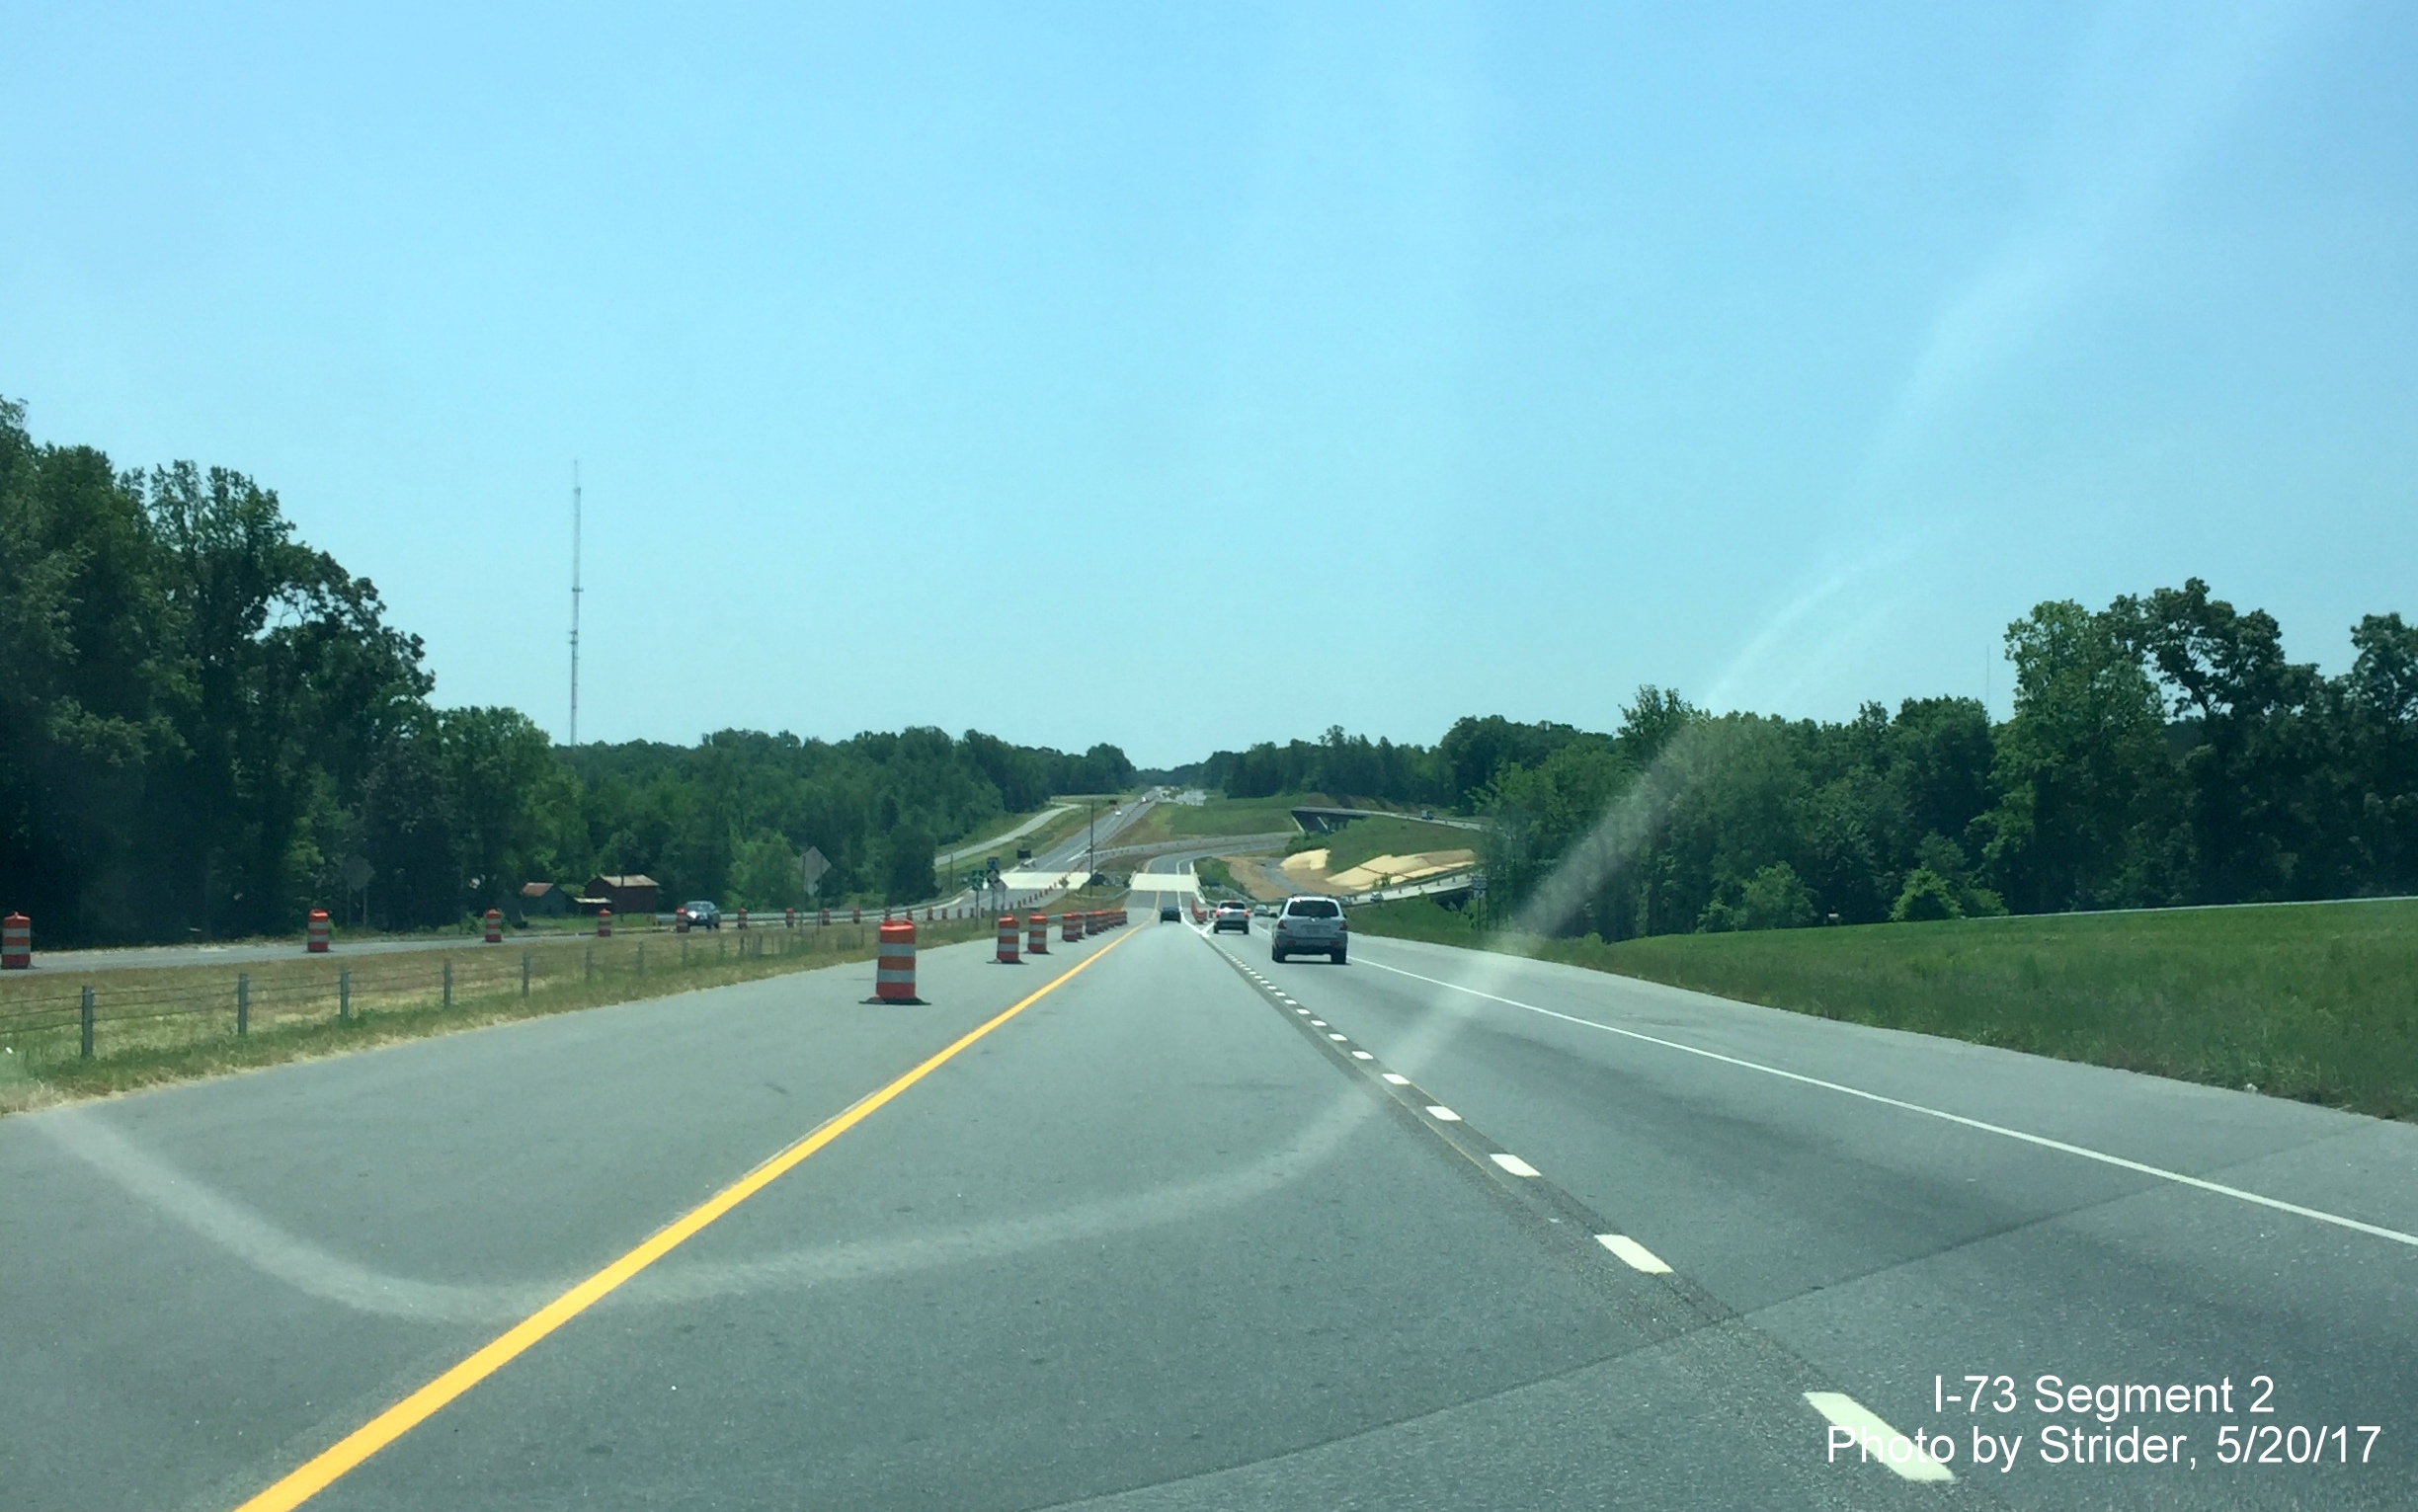 Image taken of newly opened I-73 proceeding south from US 220 South interchange in Summerfield, by Strider